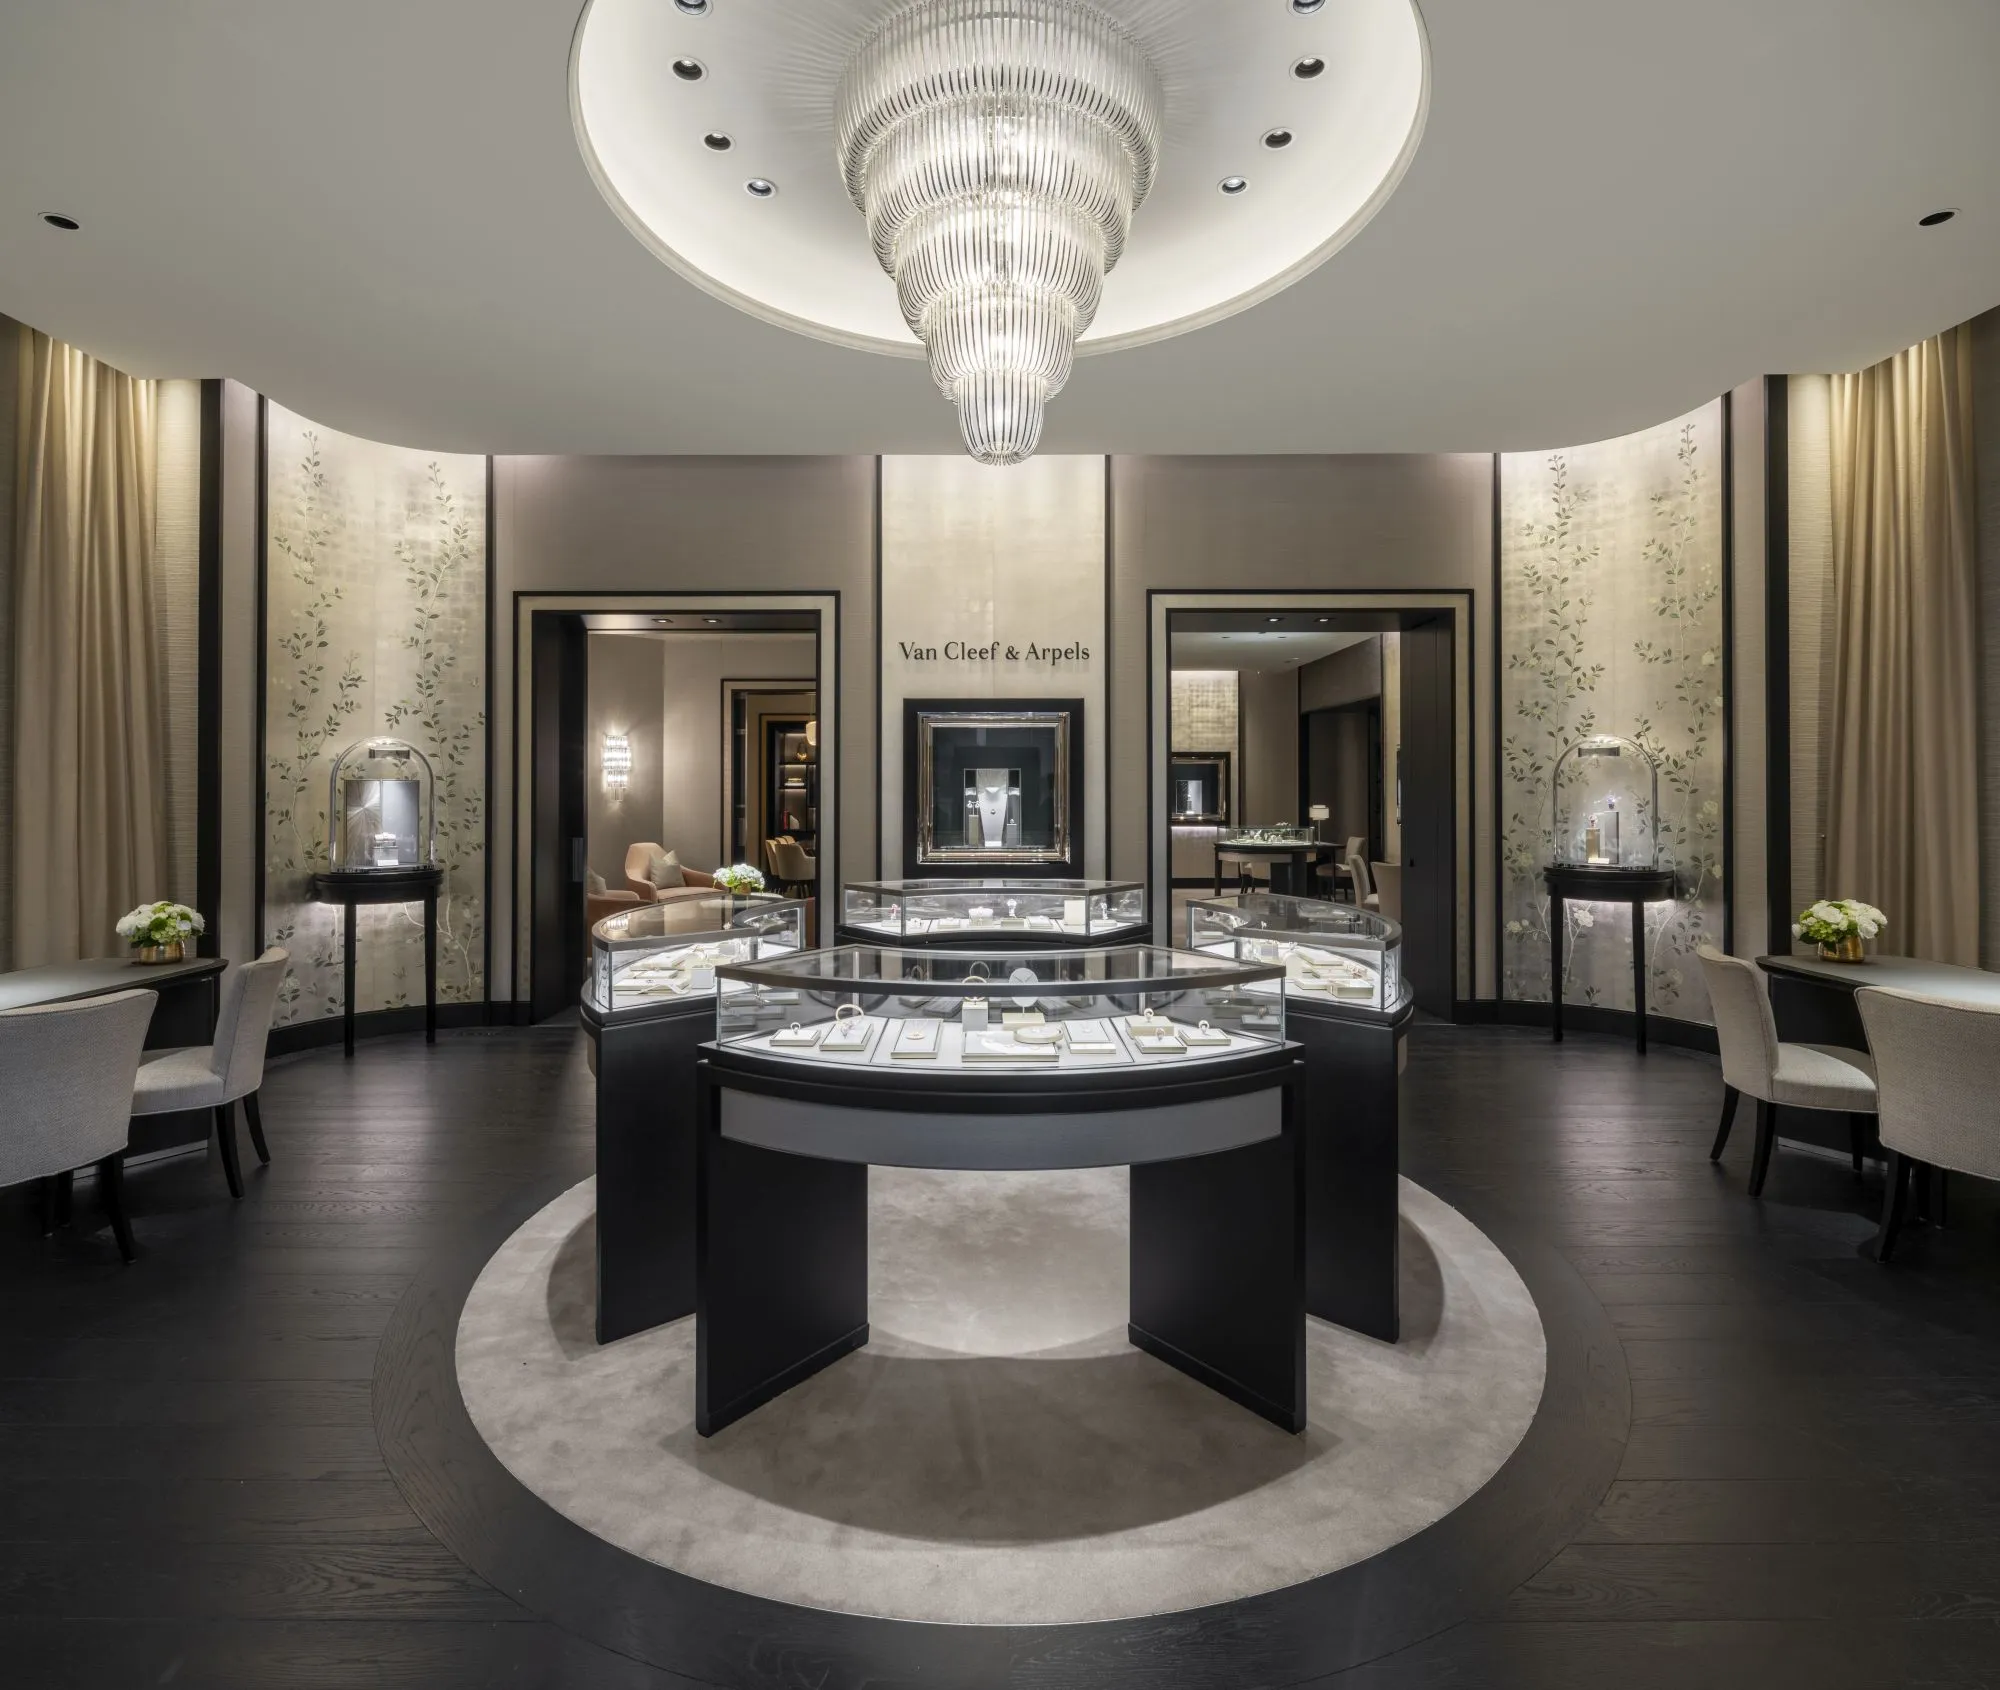 Van Cleef & Arpels’ First Canadian Flagship Boutique Opens in Toronto ...